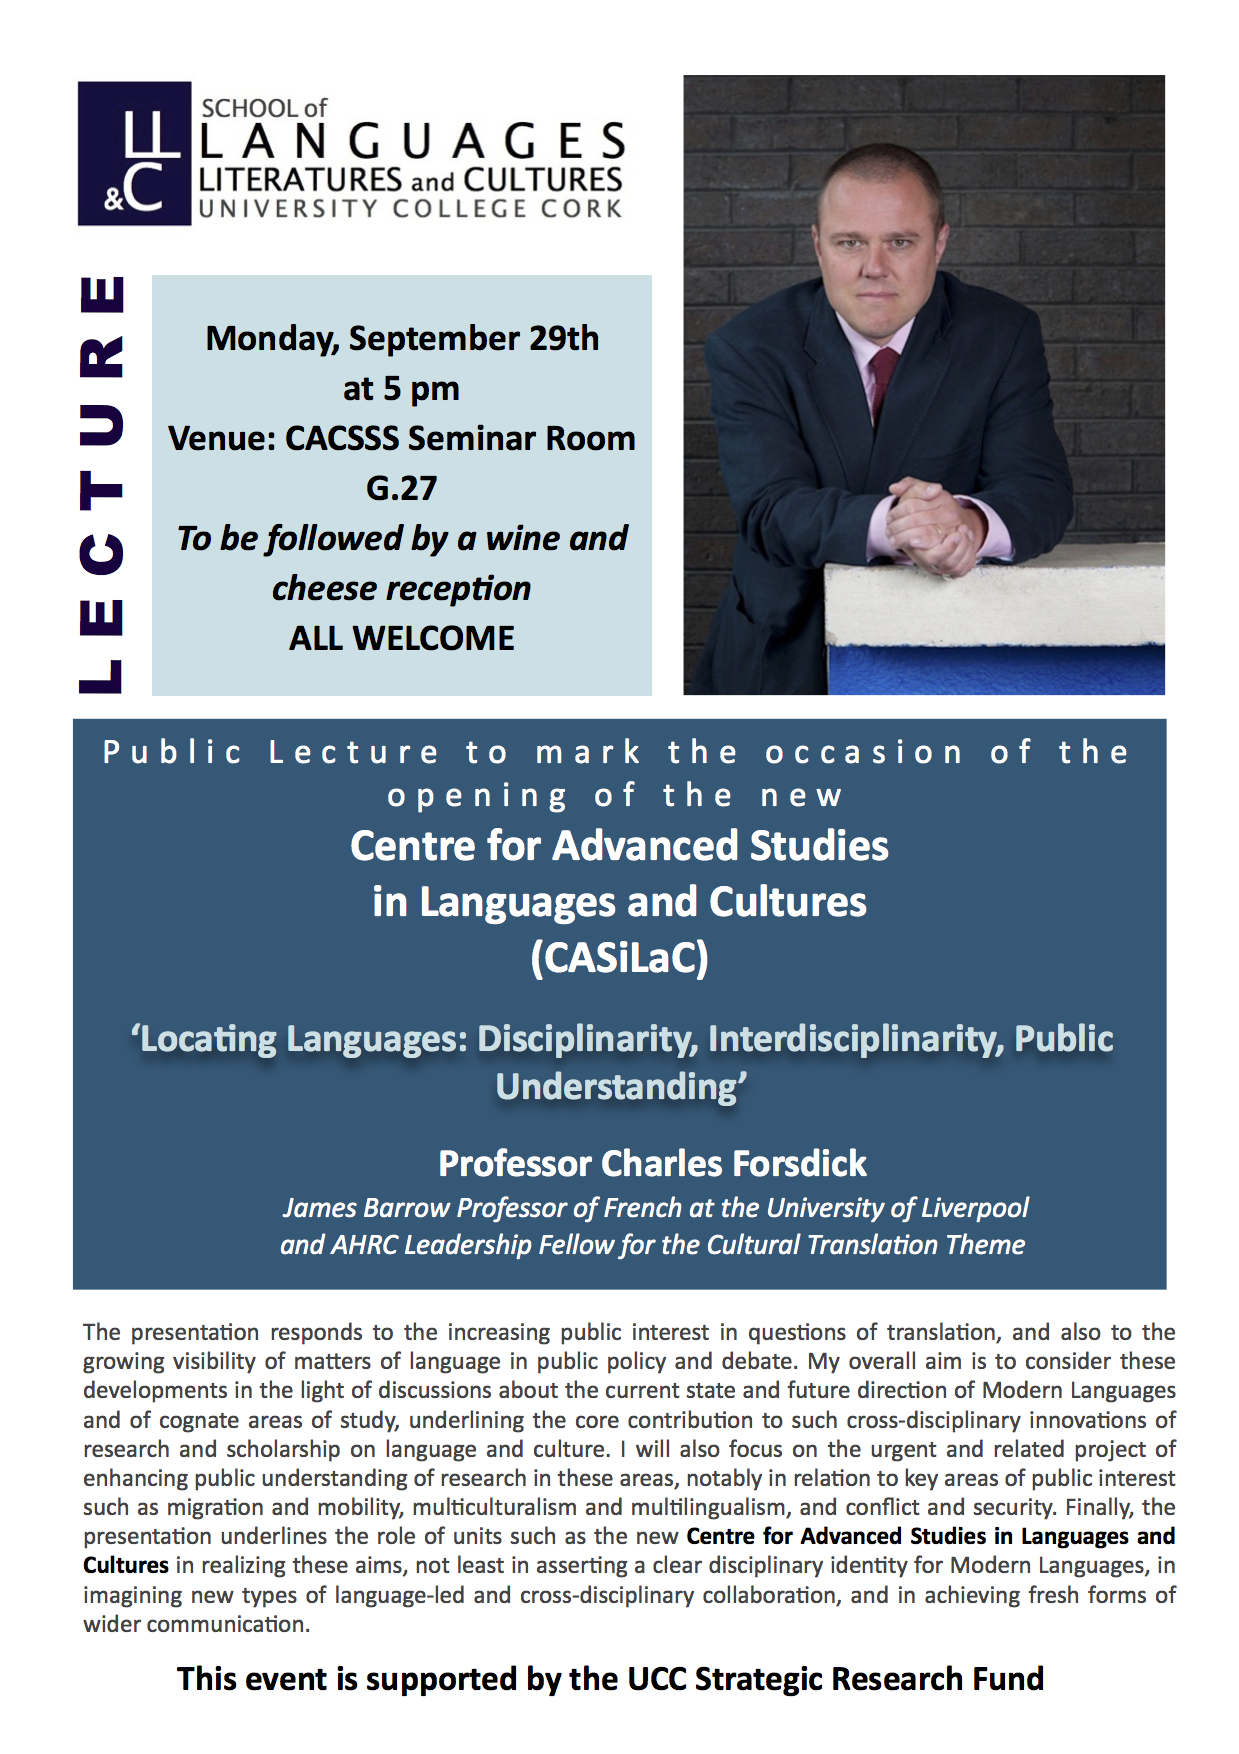 Public Lecture by Professor Charles Forsdick - 5 p.m. Monday 29th September 2014